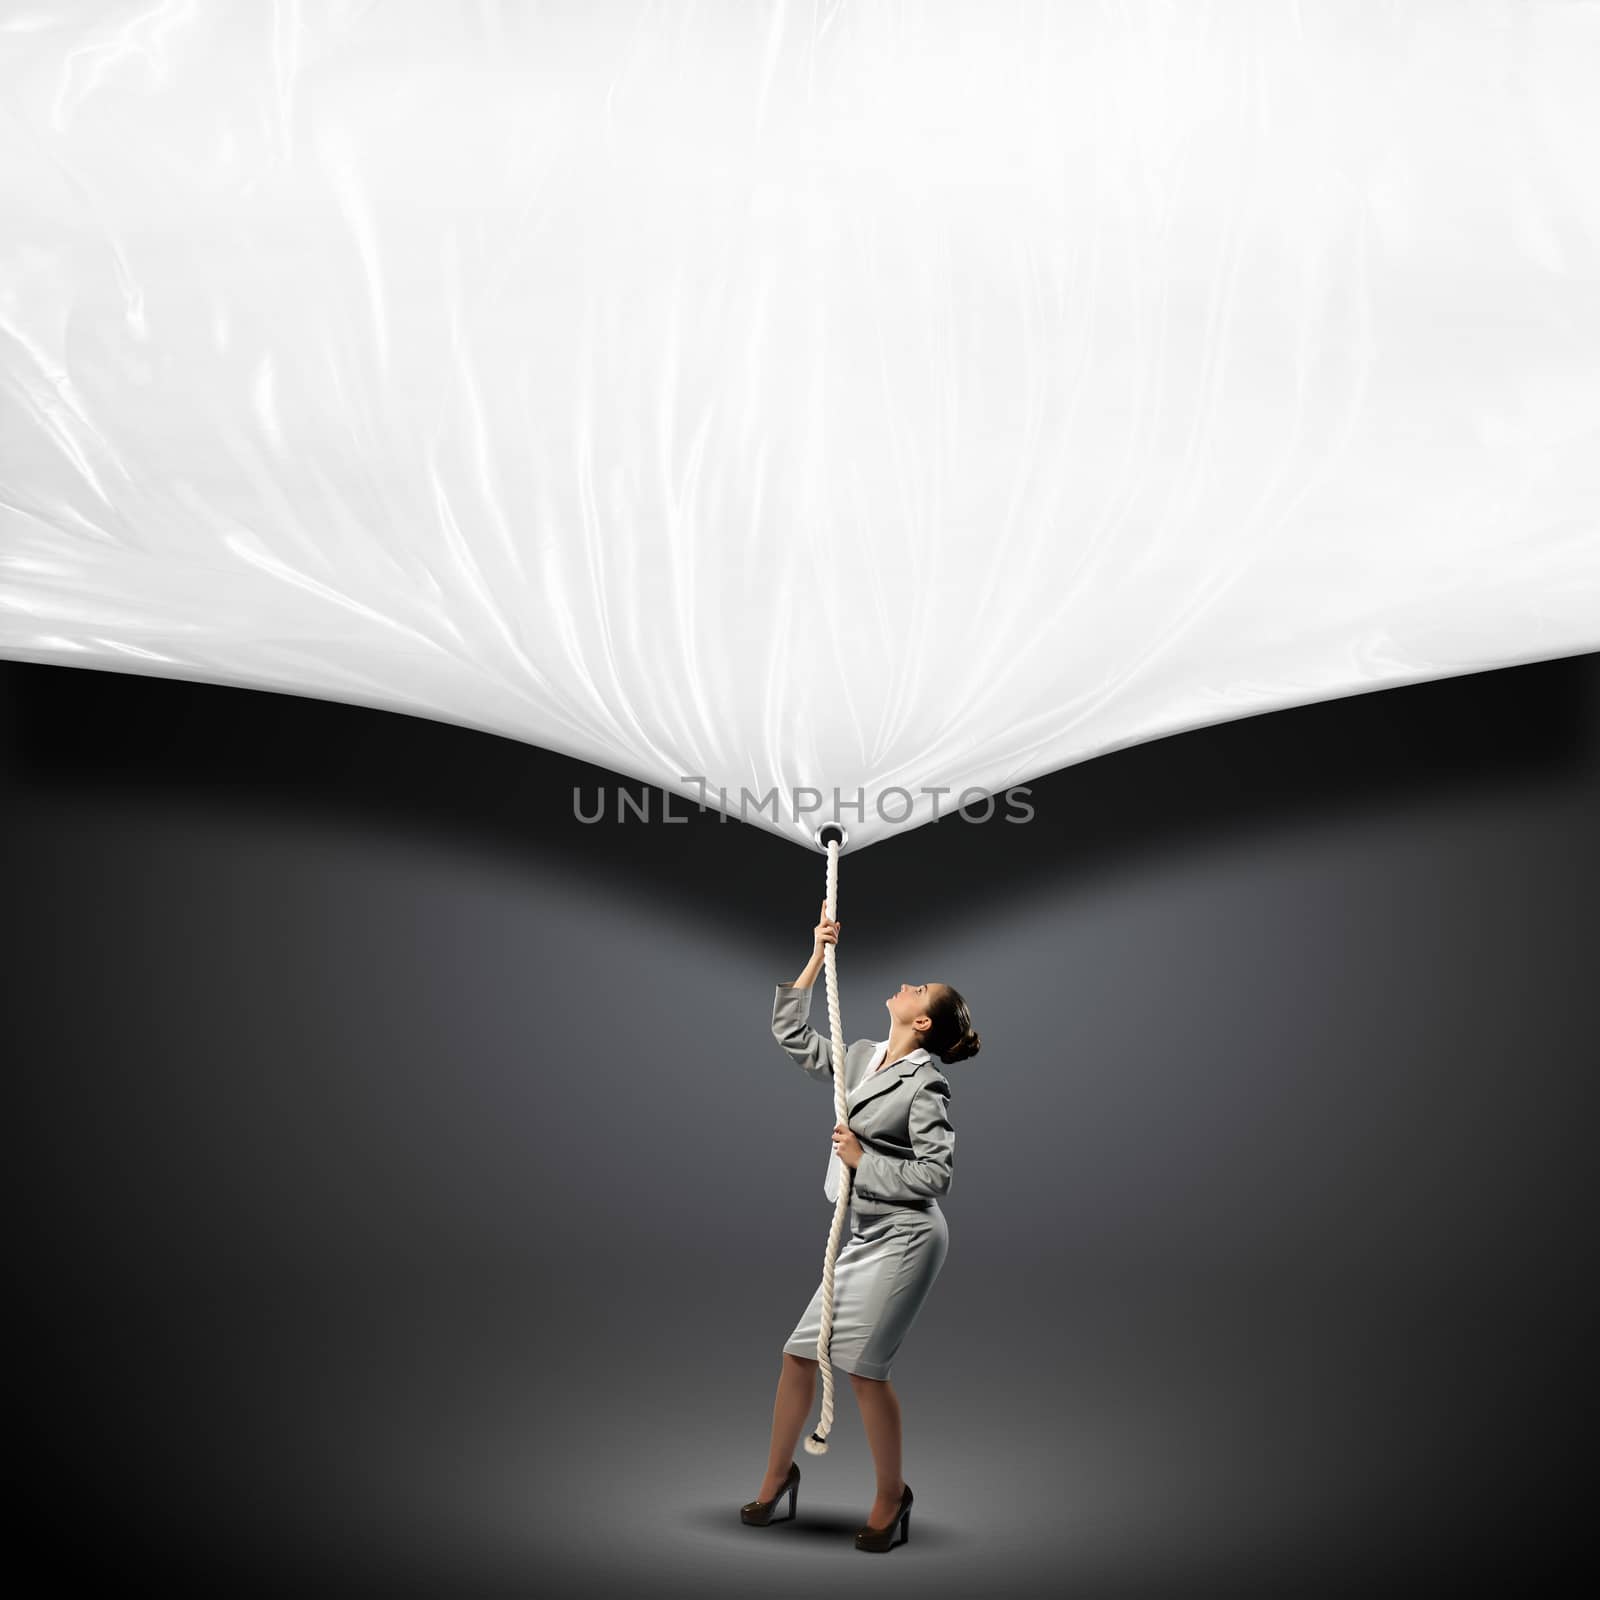 Image of businesswoman pulling blank banner. Place for text